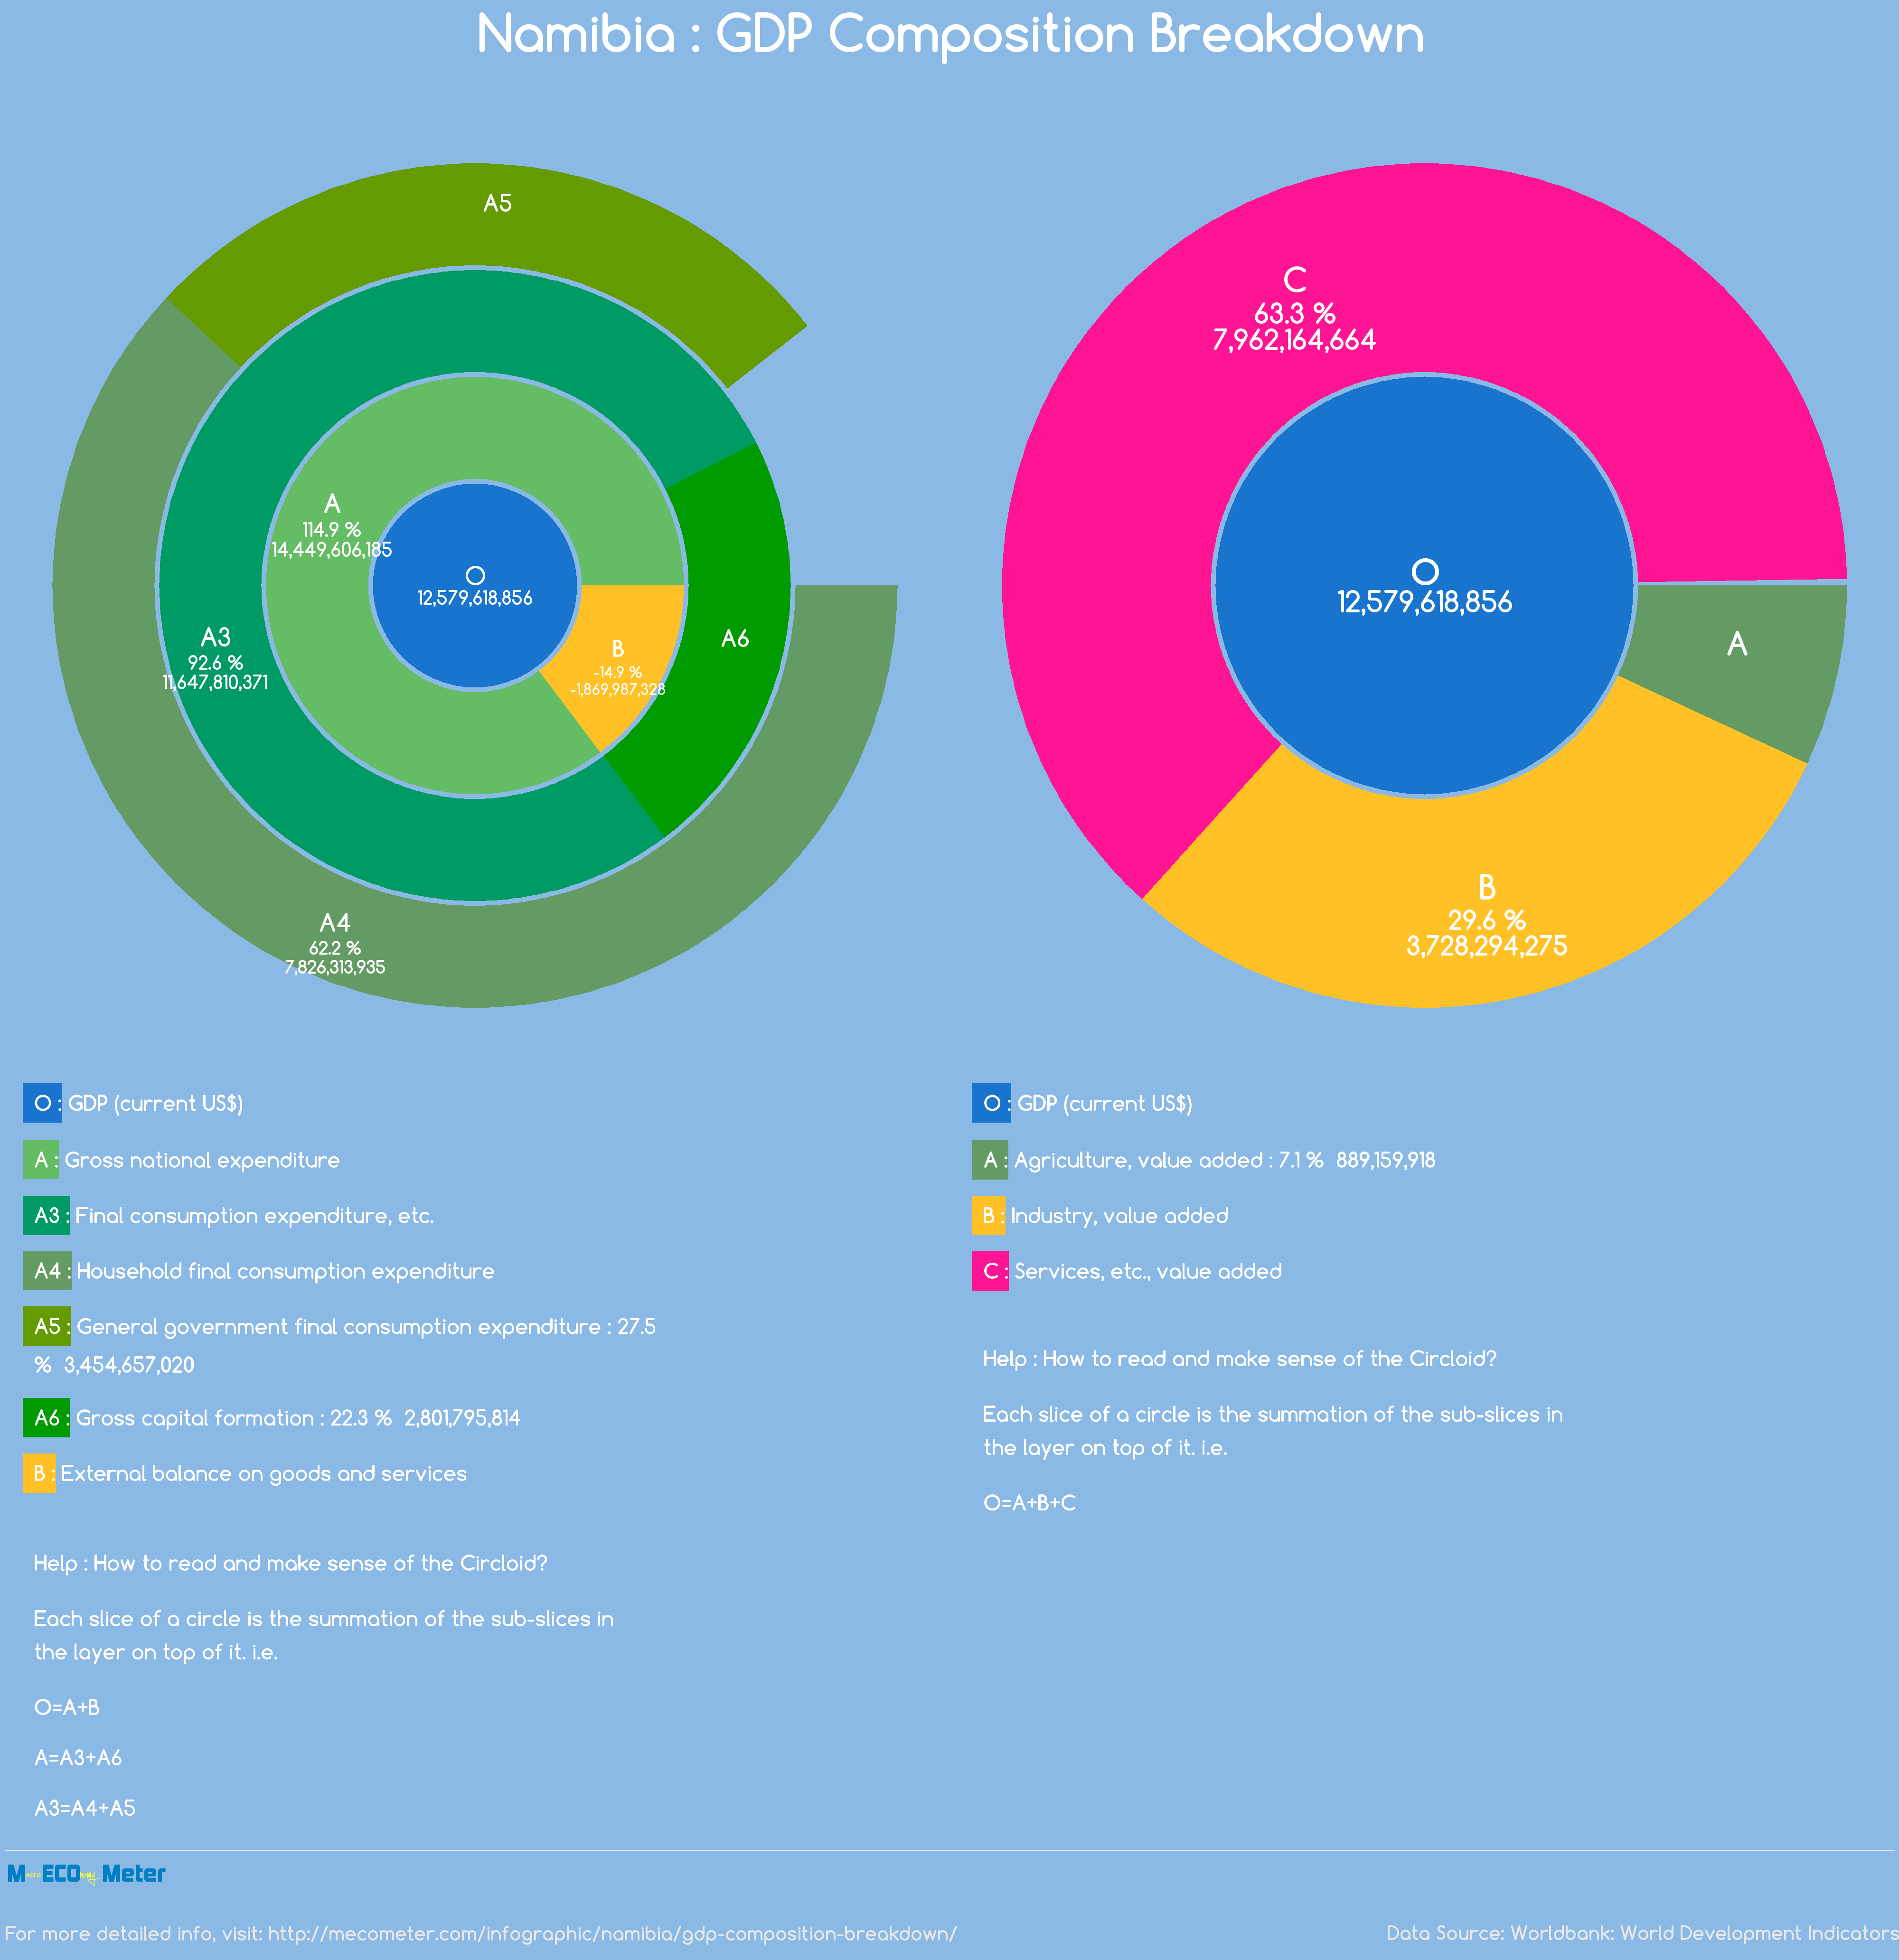 Namibia : GDP Composition Breakdown